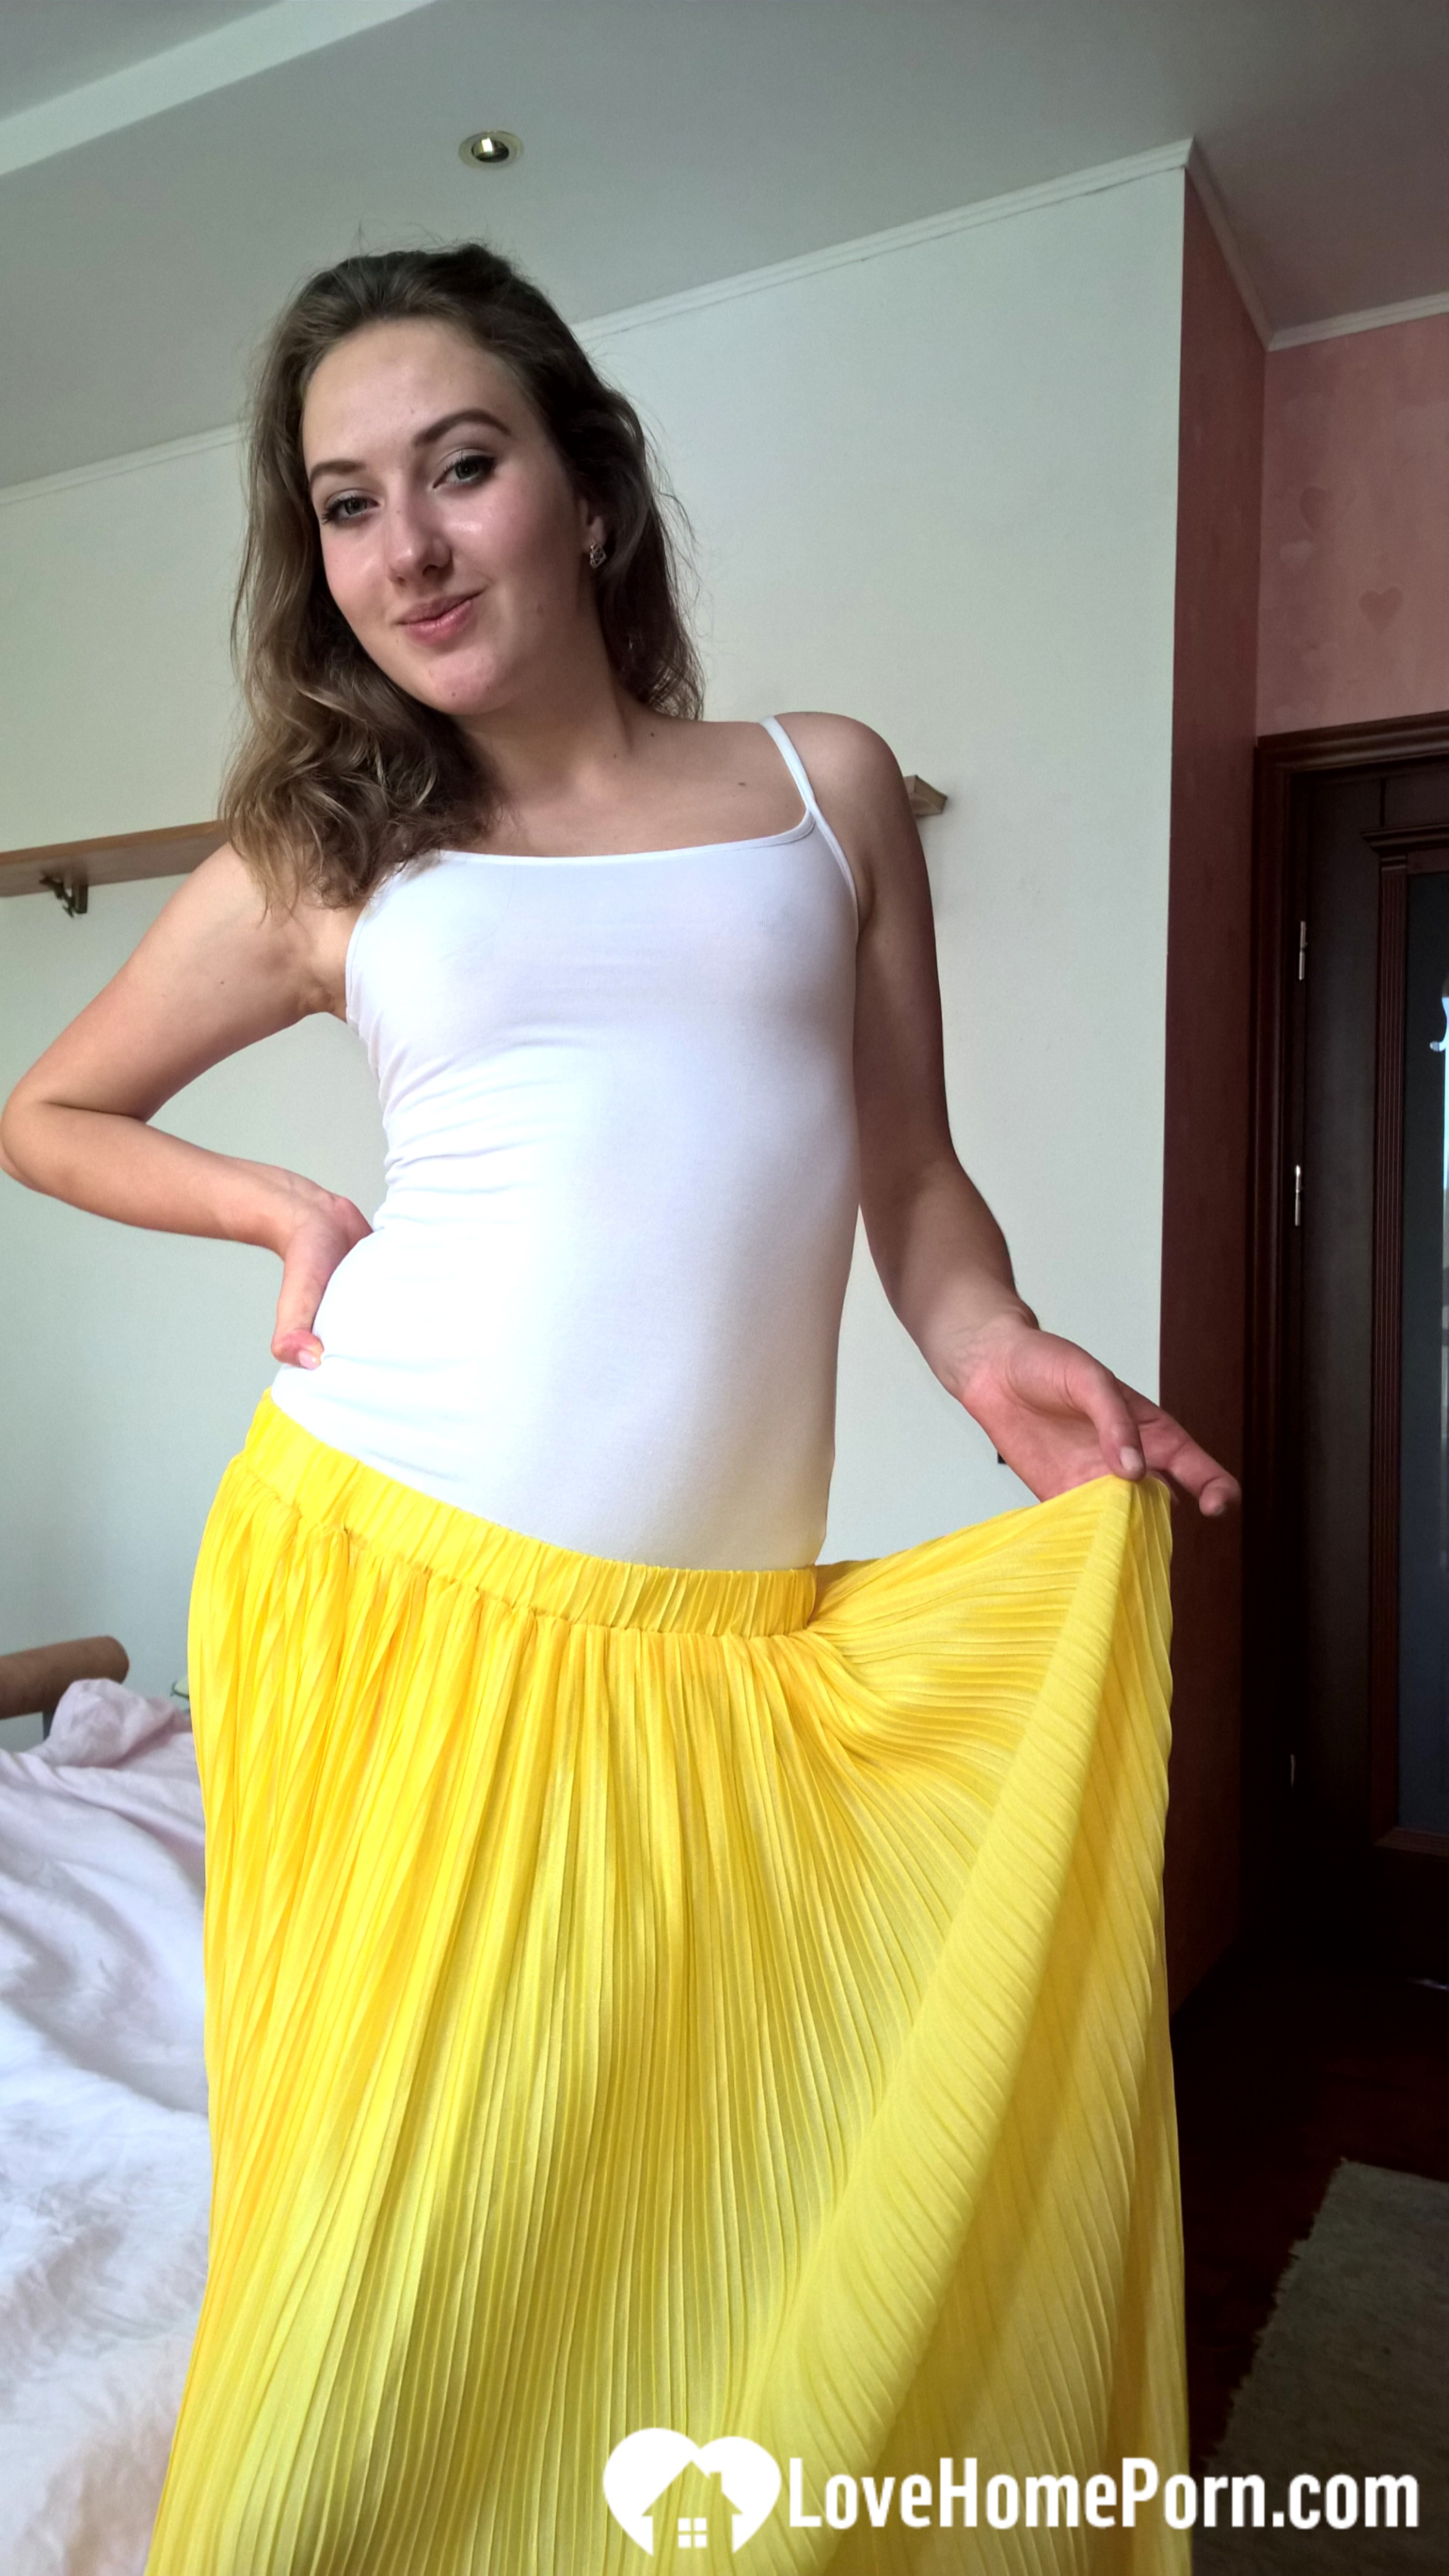 Nerdy cutie tries on some sexy clothes